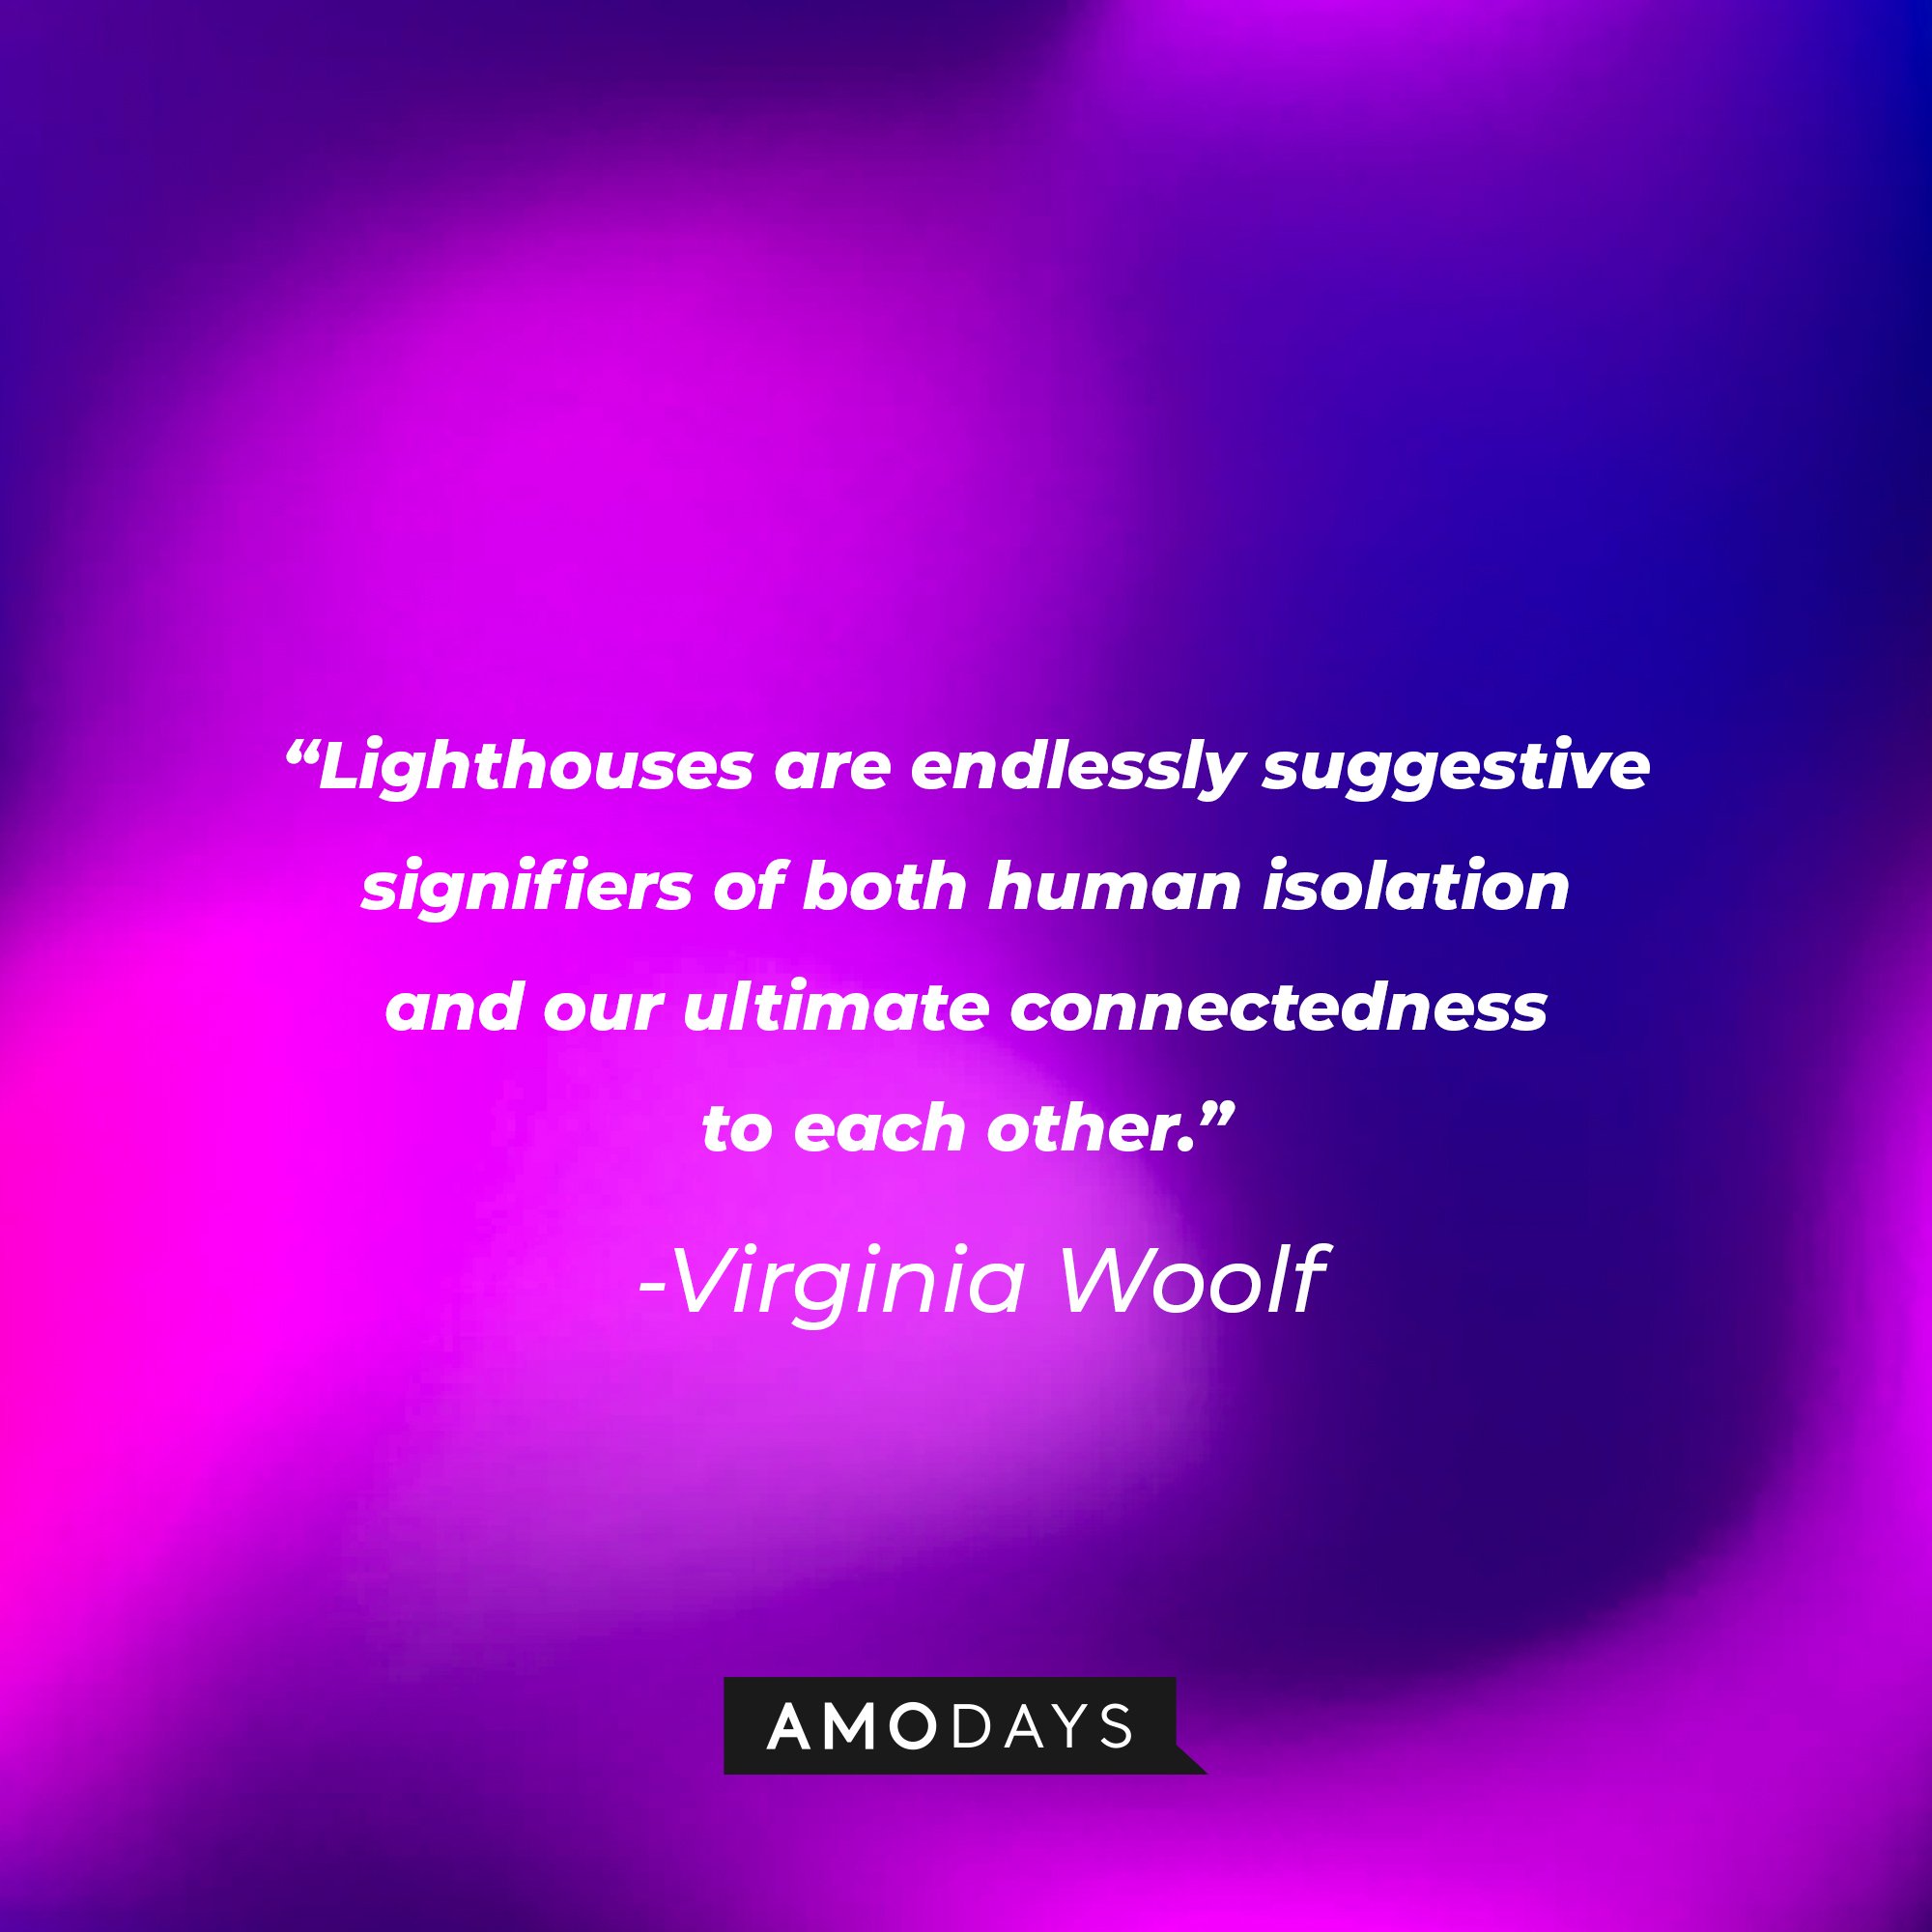 Virginia Woolf’s quote: “Lighthouses are endlessly suggestive signifiers of both human isolation and our ultimate connectedness to each other.” | Image: AmoDays